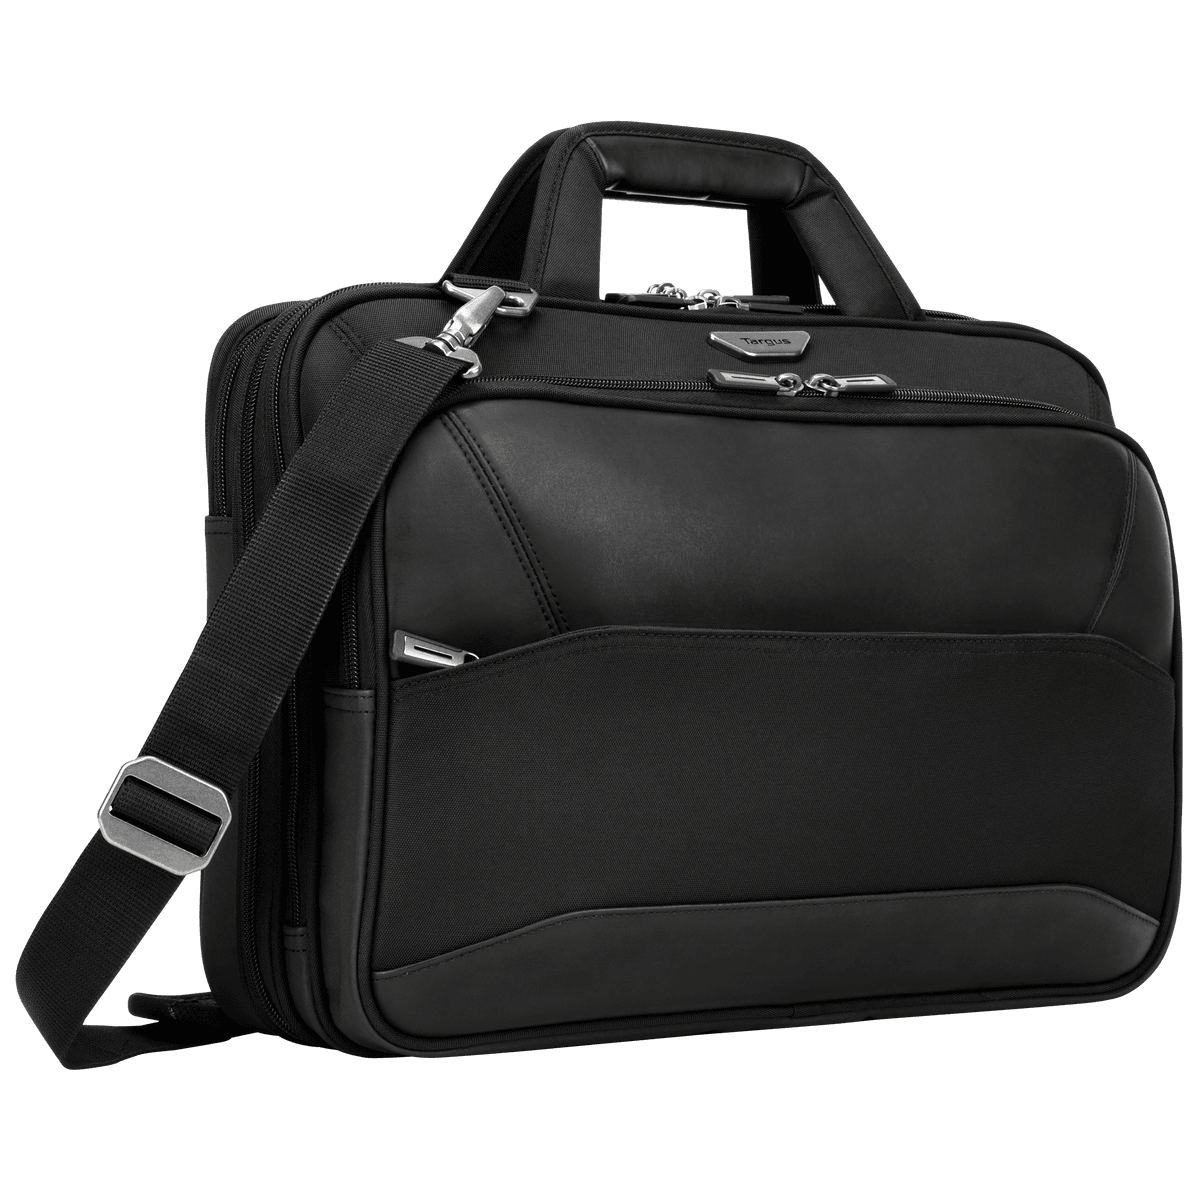 Mobile ViP Checkpoint-Friendly Topload 15.6-inch Laptop Briefcase